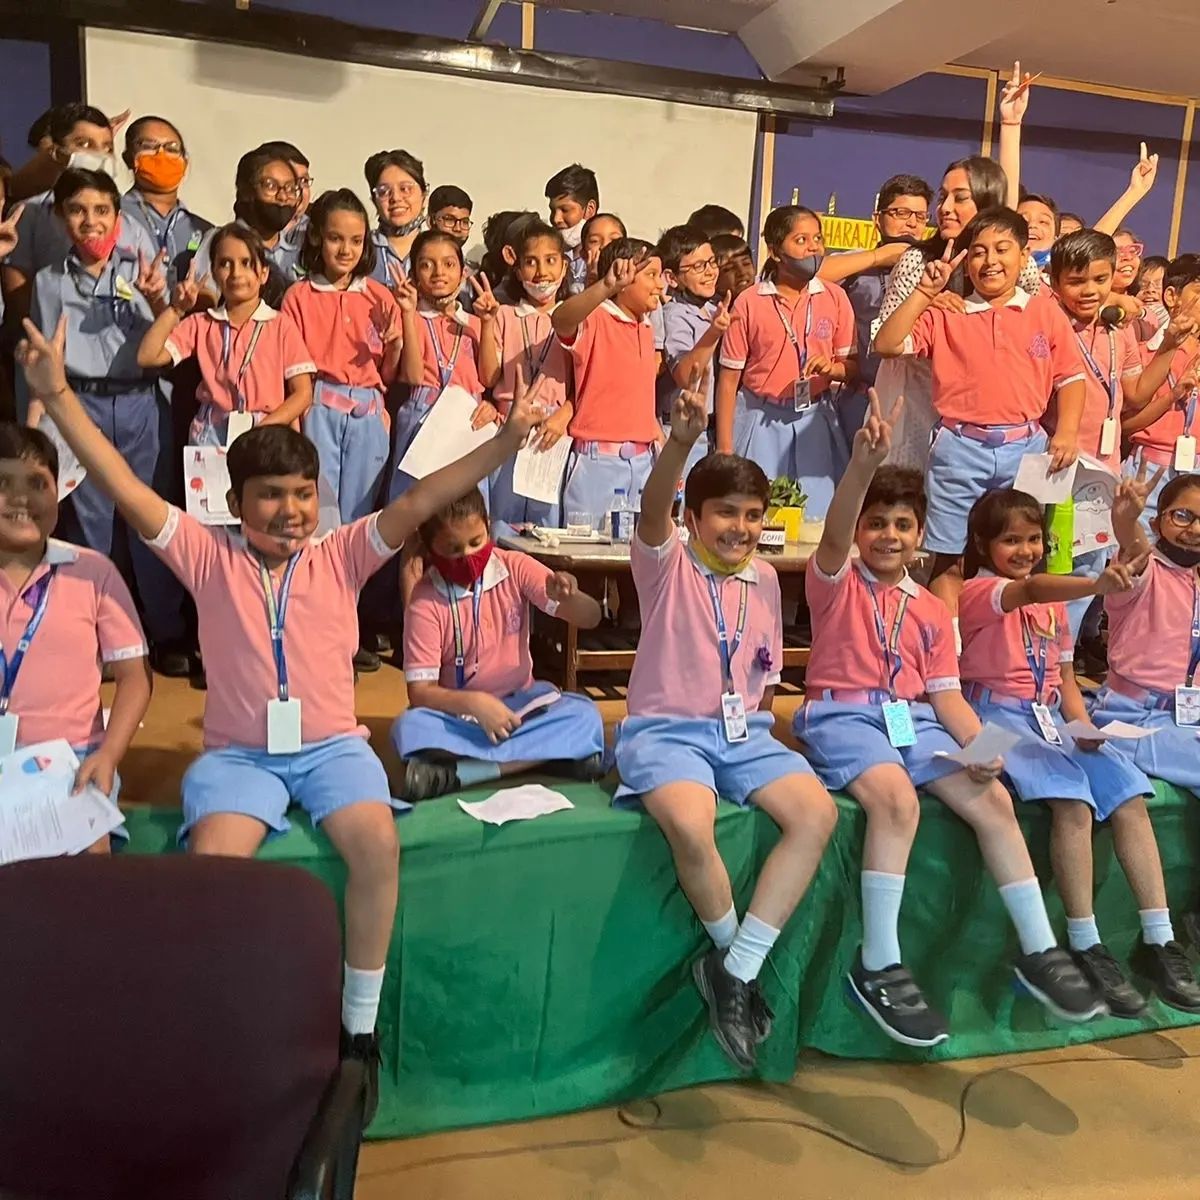 The Cambridge Wing of Maharaja Agarsain Public School hosted an interactive dental and oral hygiene programme for Cambridge 1 to 10 students.